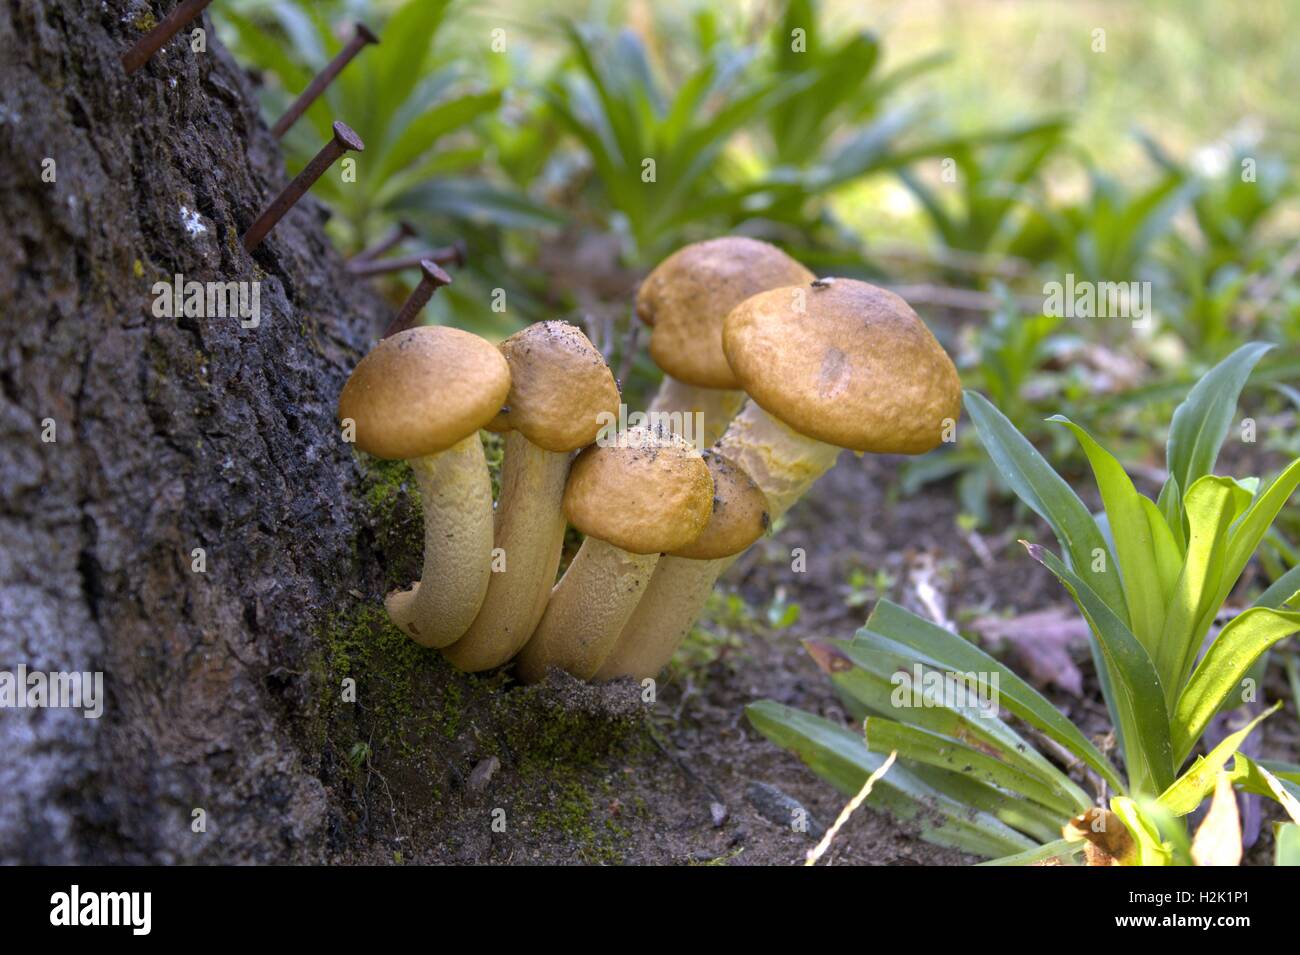 Cluster of Mushrooms By a Tree Stock Photo